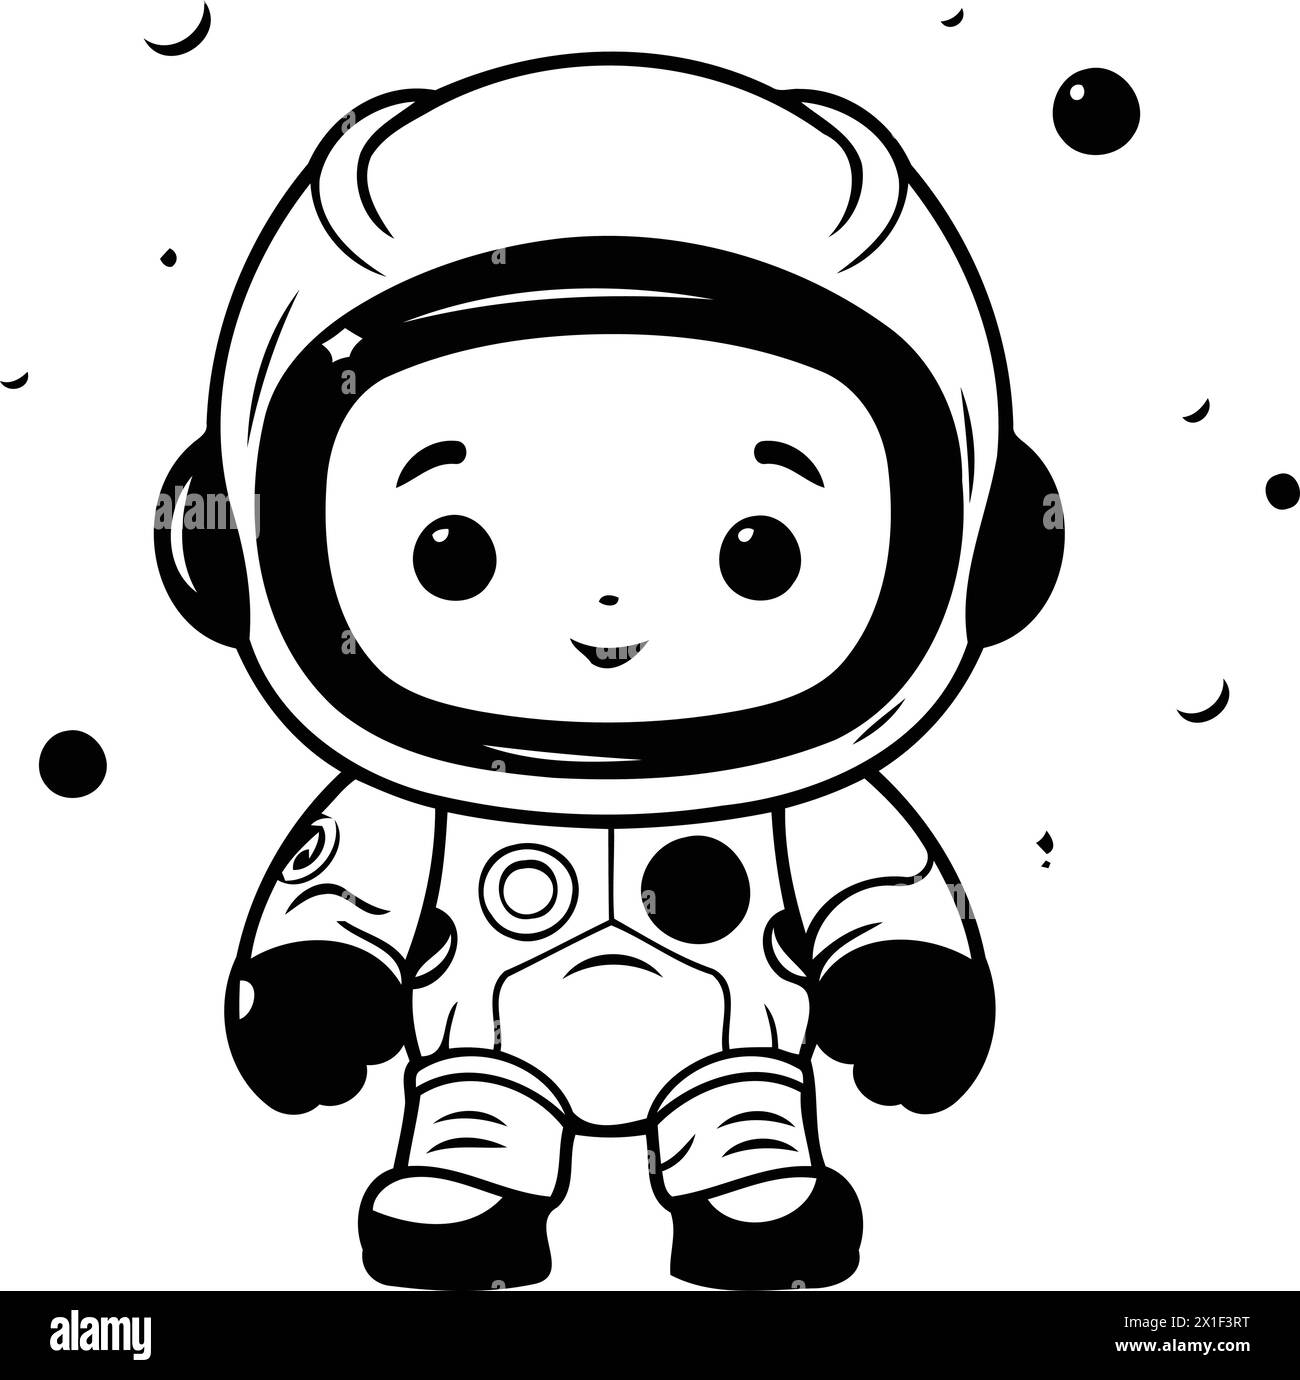 Cute astronaut with space suit on white background. Vector illustration. Stock Vector